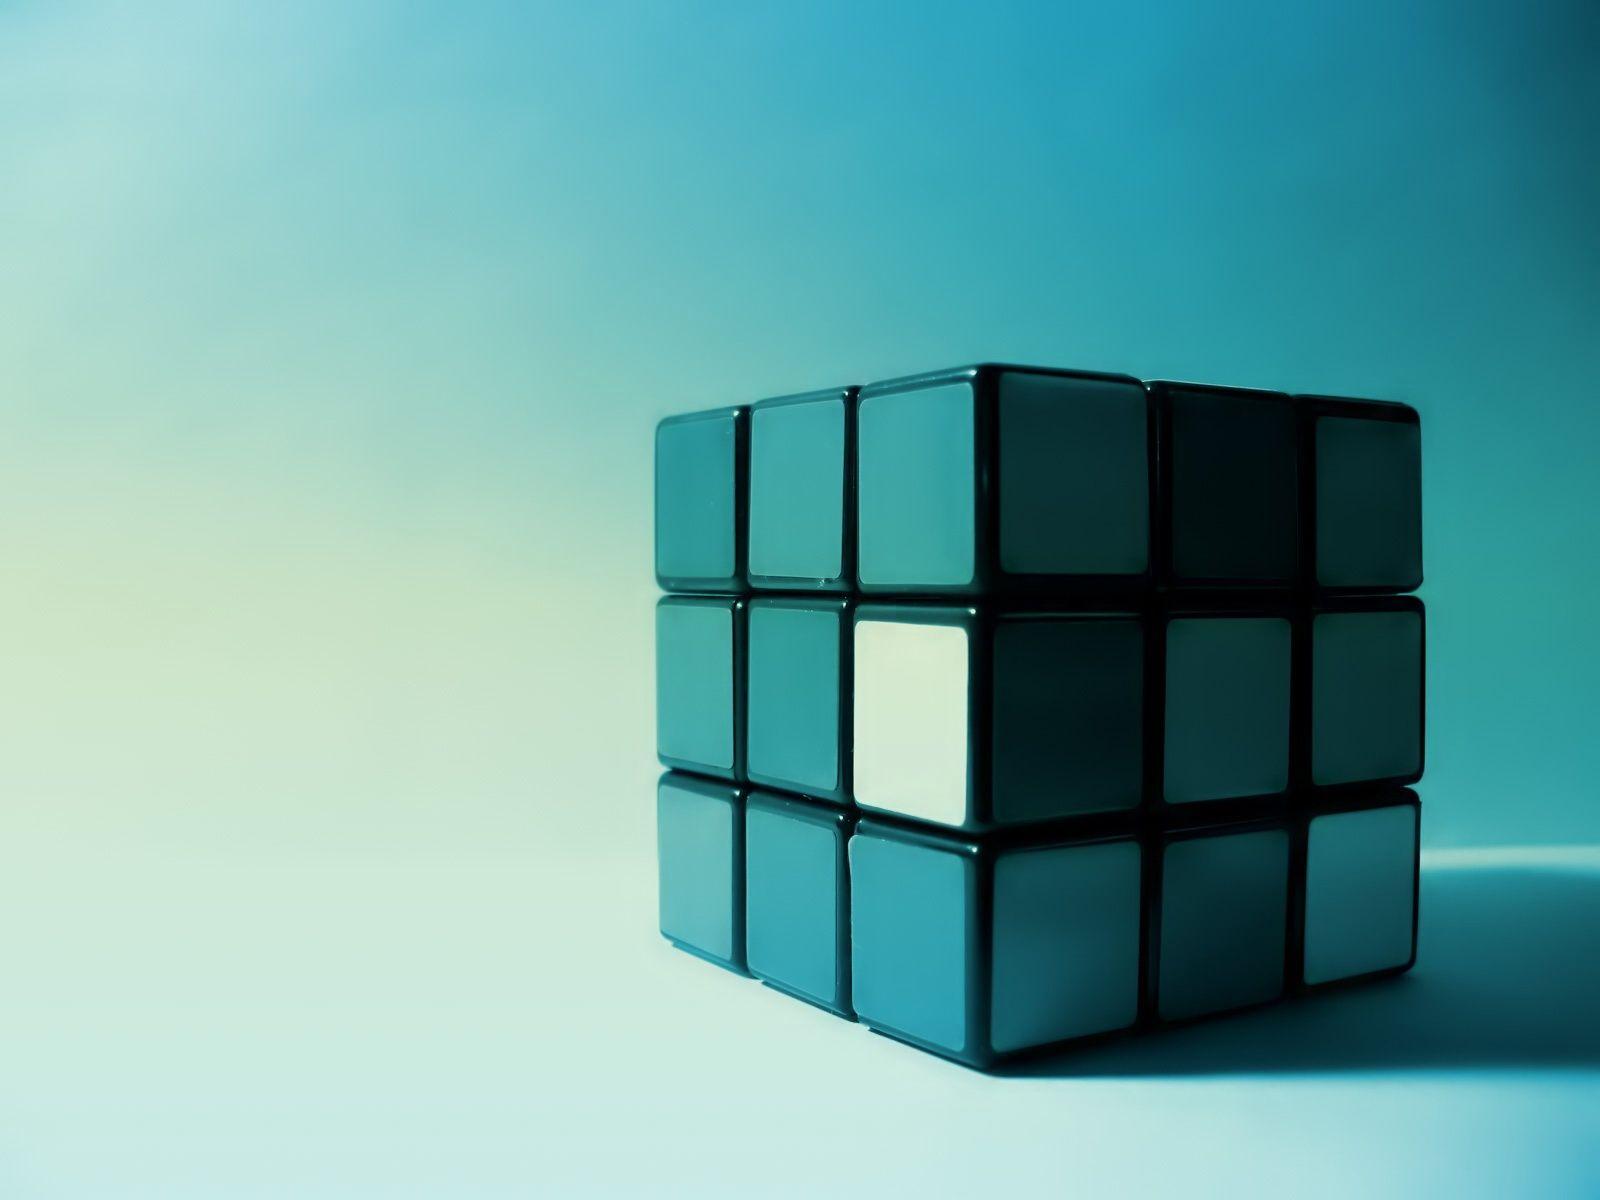 Rubik Cube wallpaper and image, picture, photo